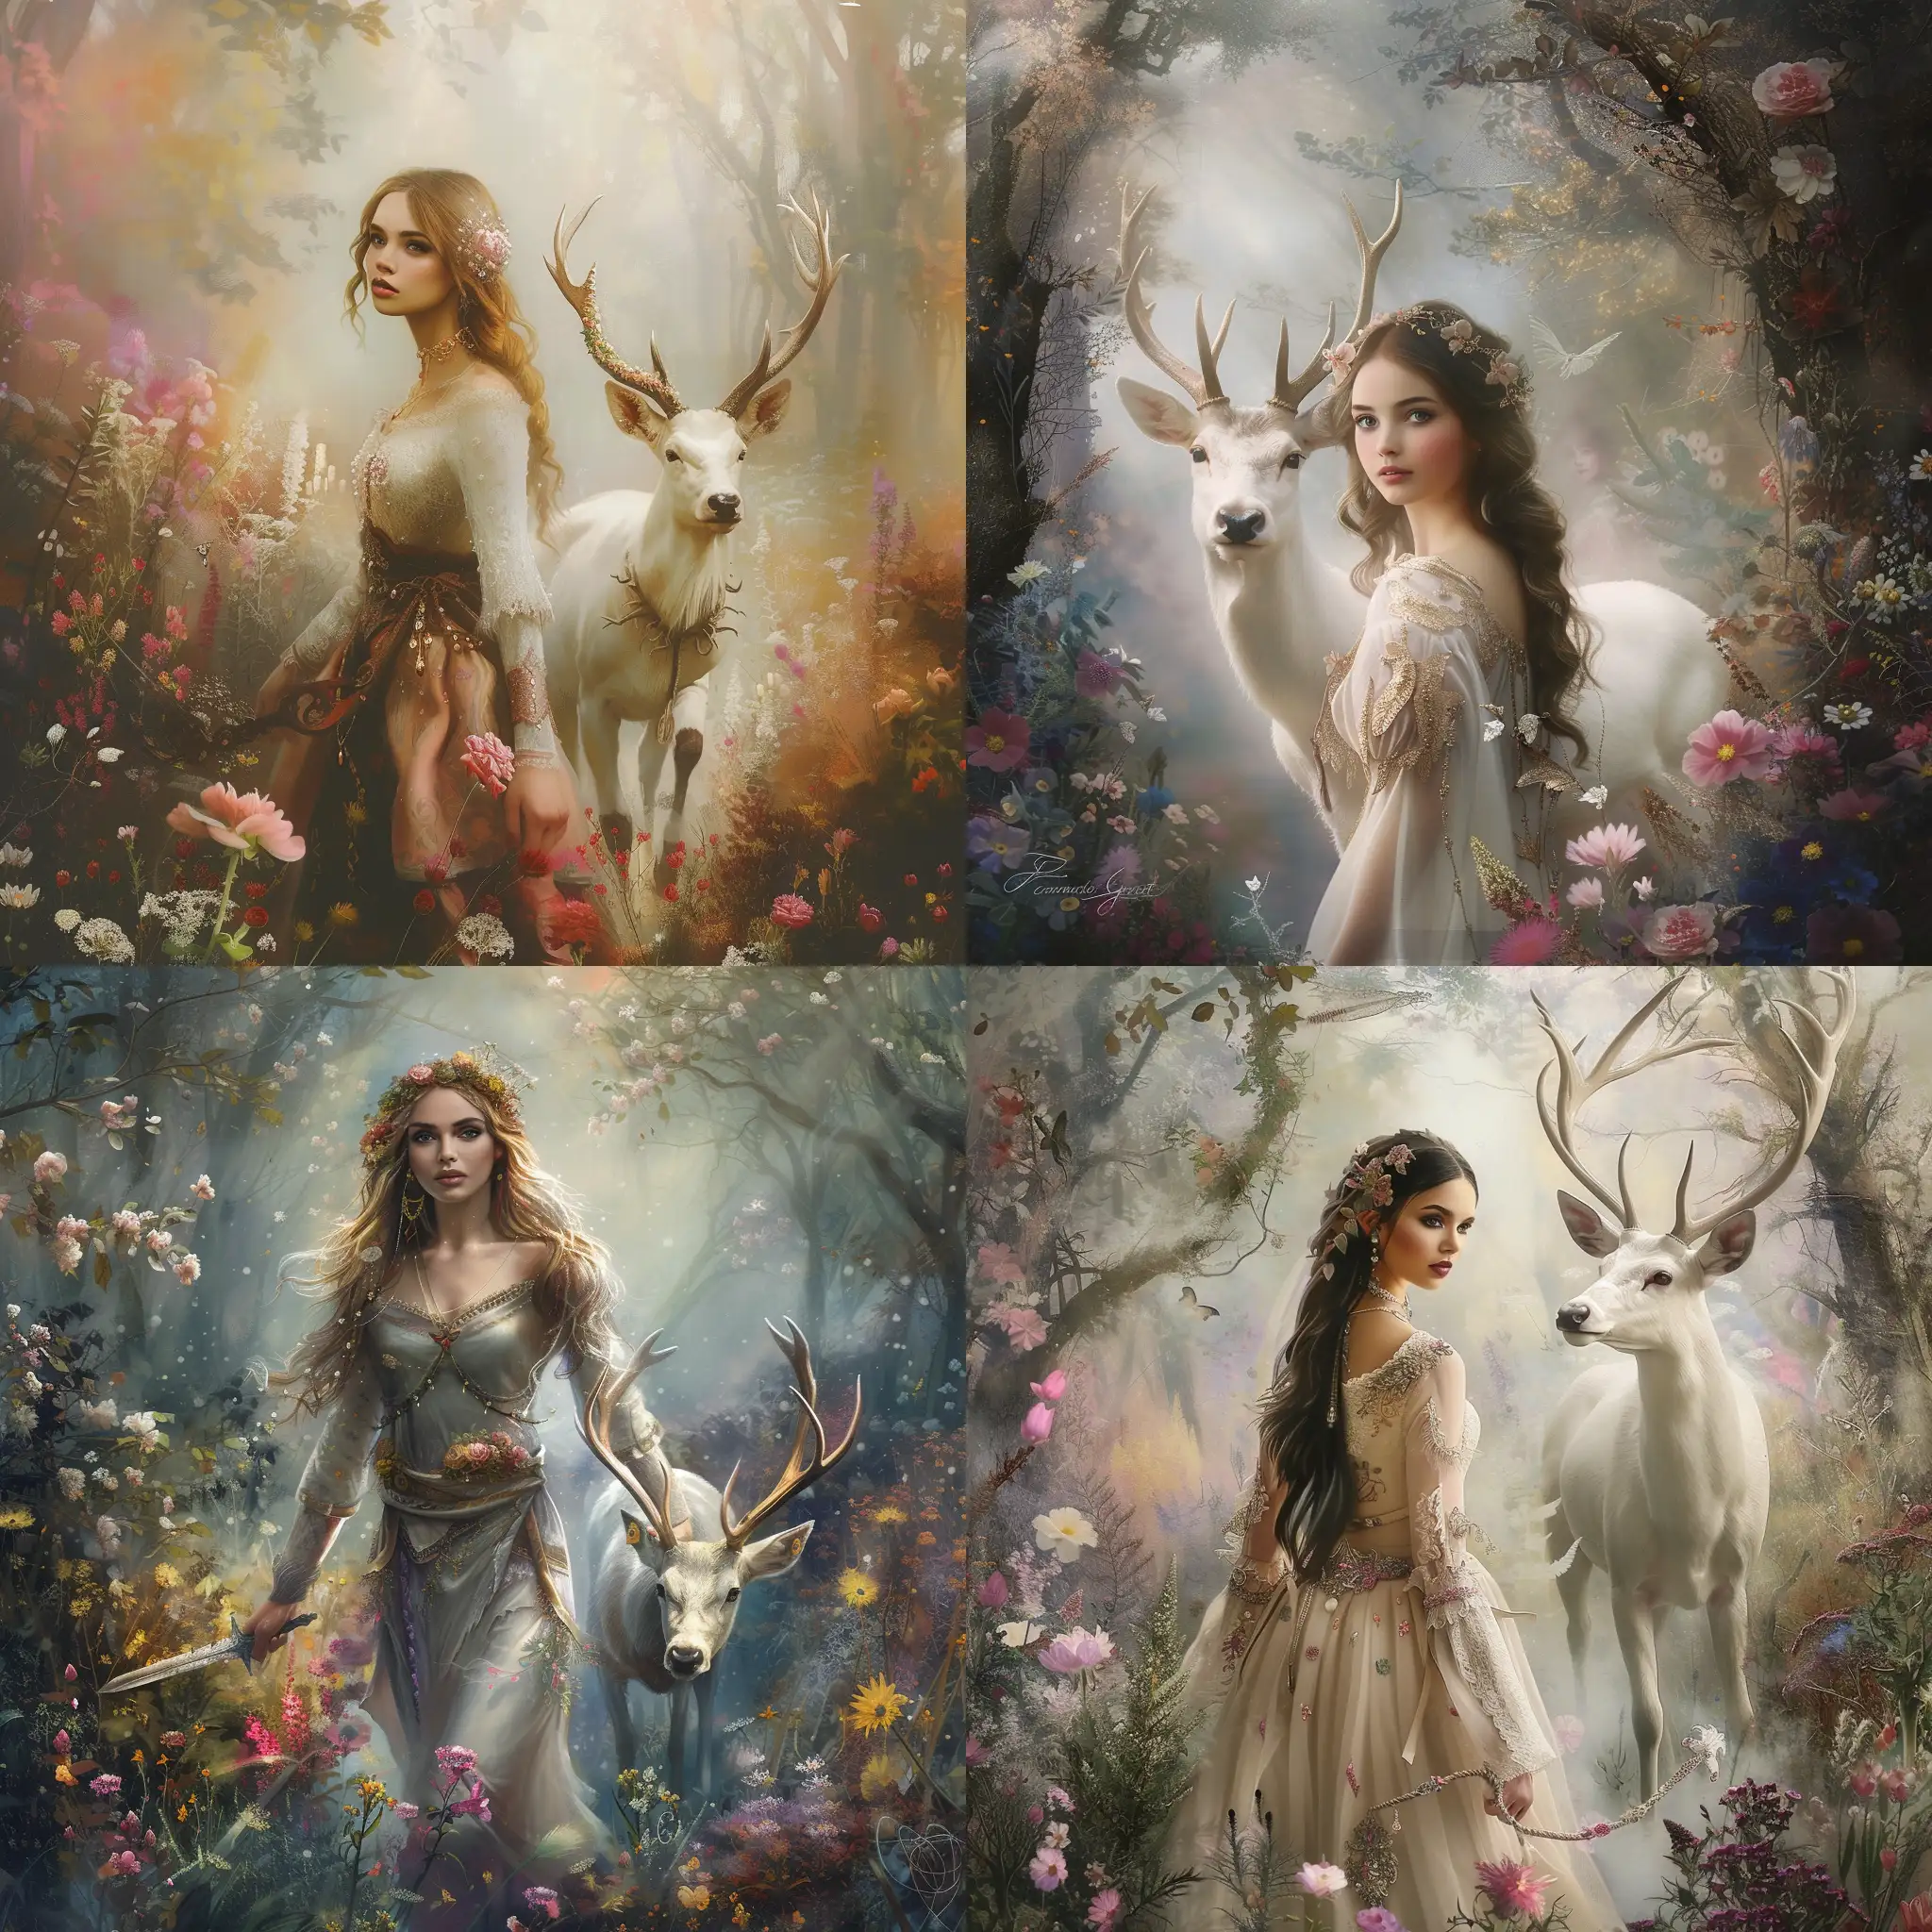 Medieval-Woman-Leading-White-Stag-through-Enchanted-Forest